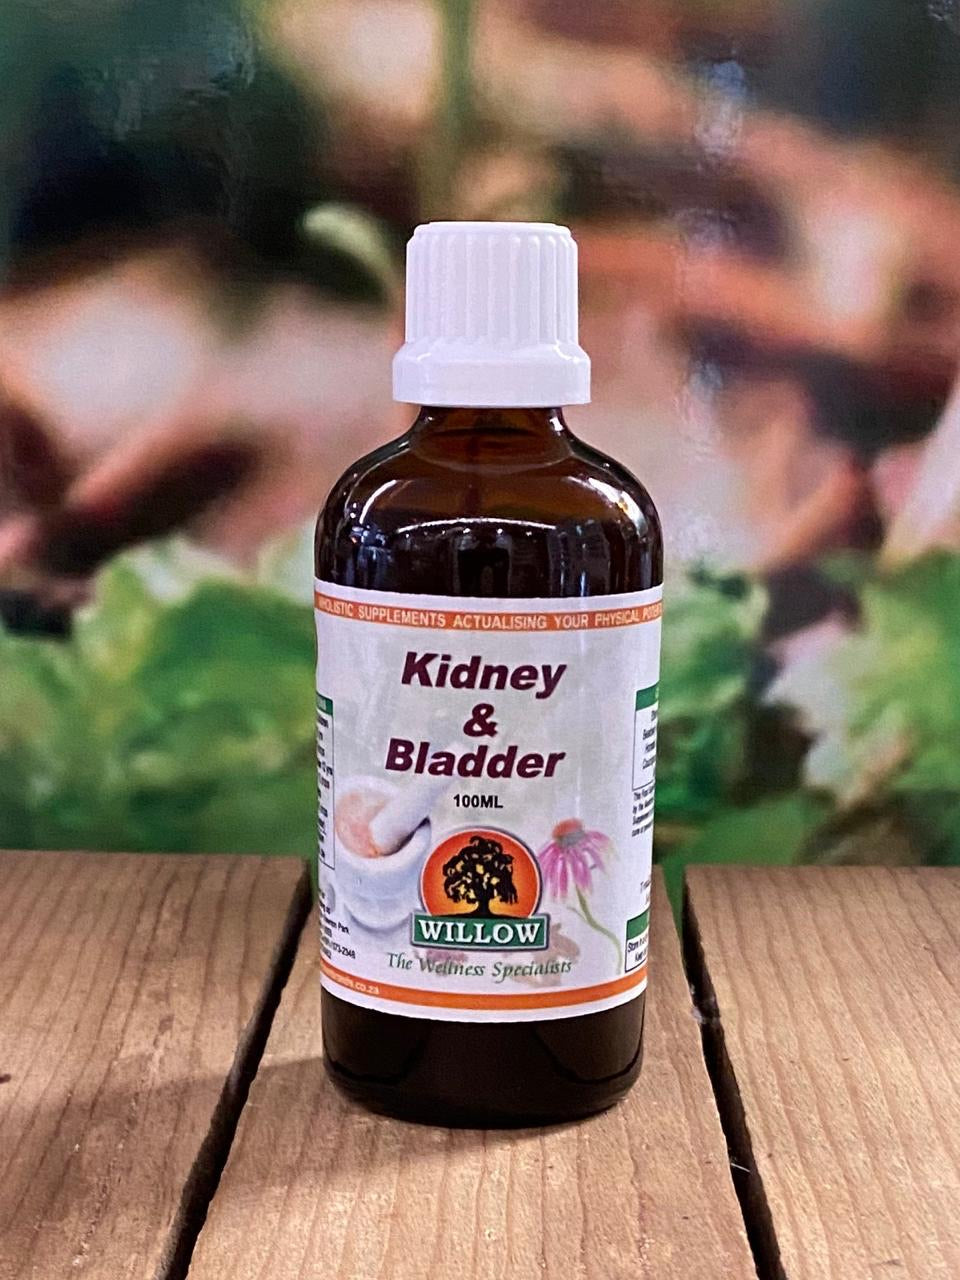 Willow Kidney and Bladder drops 100ml